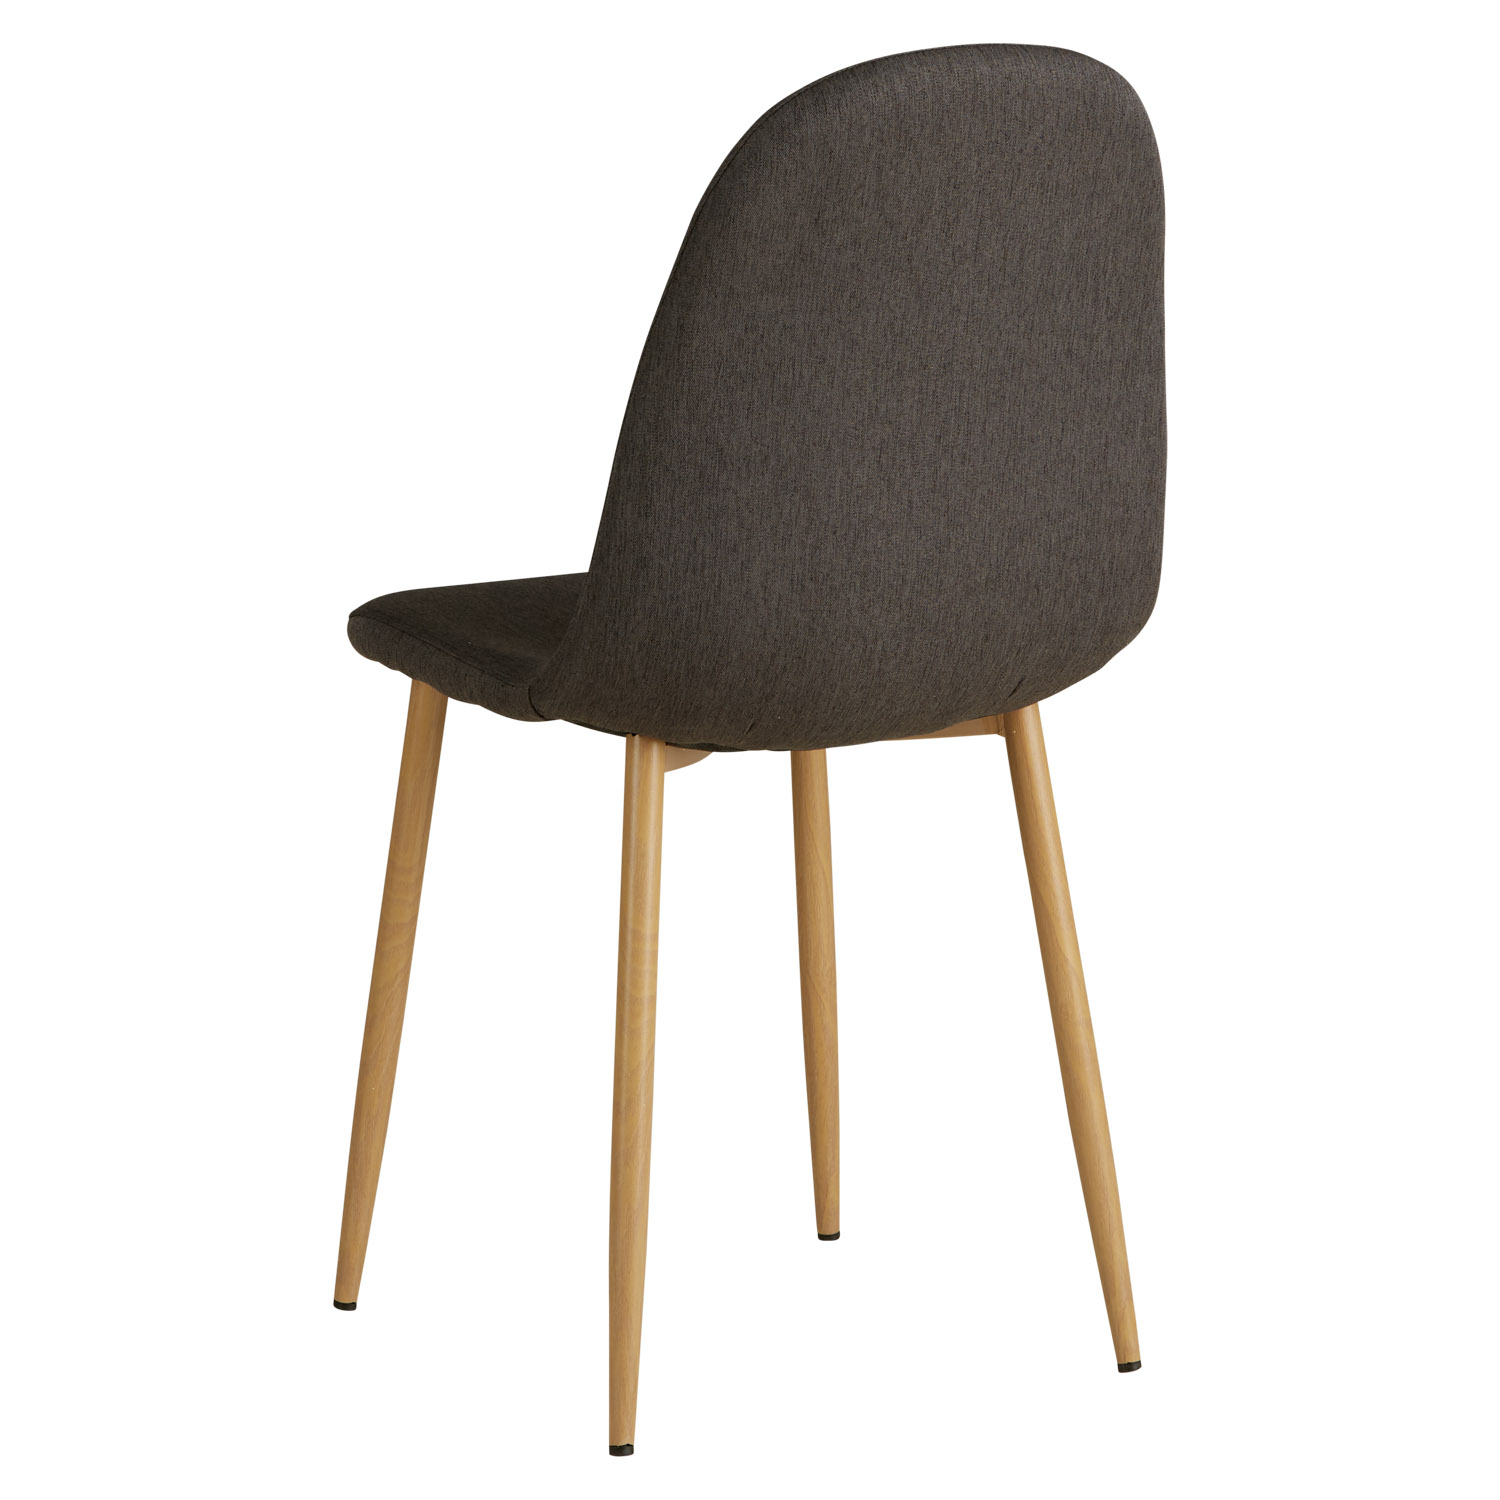 Dining Chair Egg Chair Grey Armchair Dining Room Chair Upholstered Chair Eames Chair Kitchen Chair